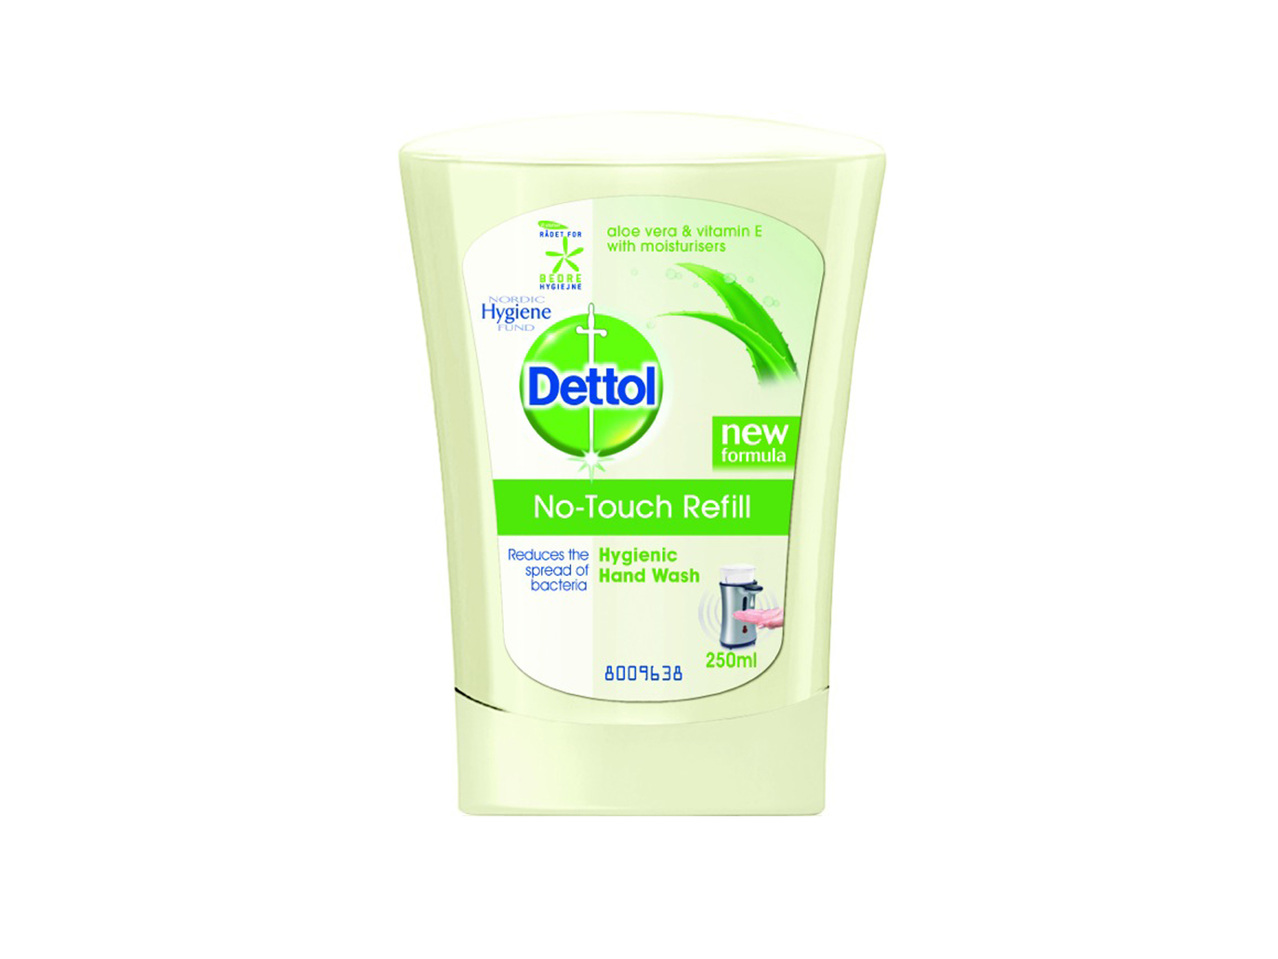 DETTOL NO-TOUCH REFILL